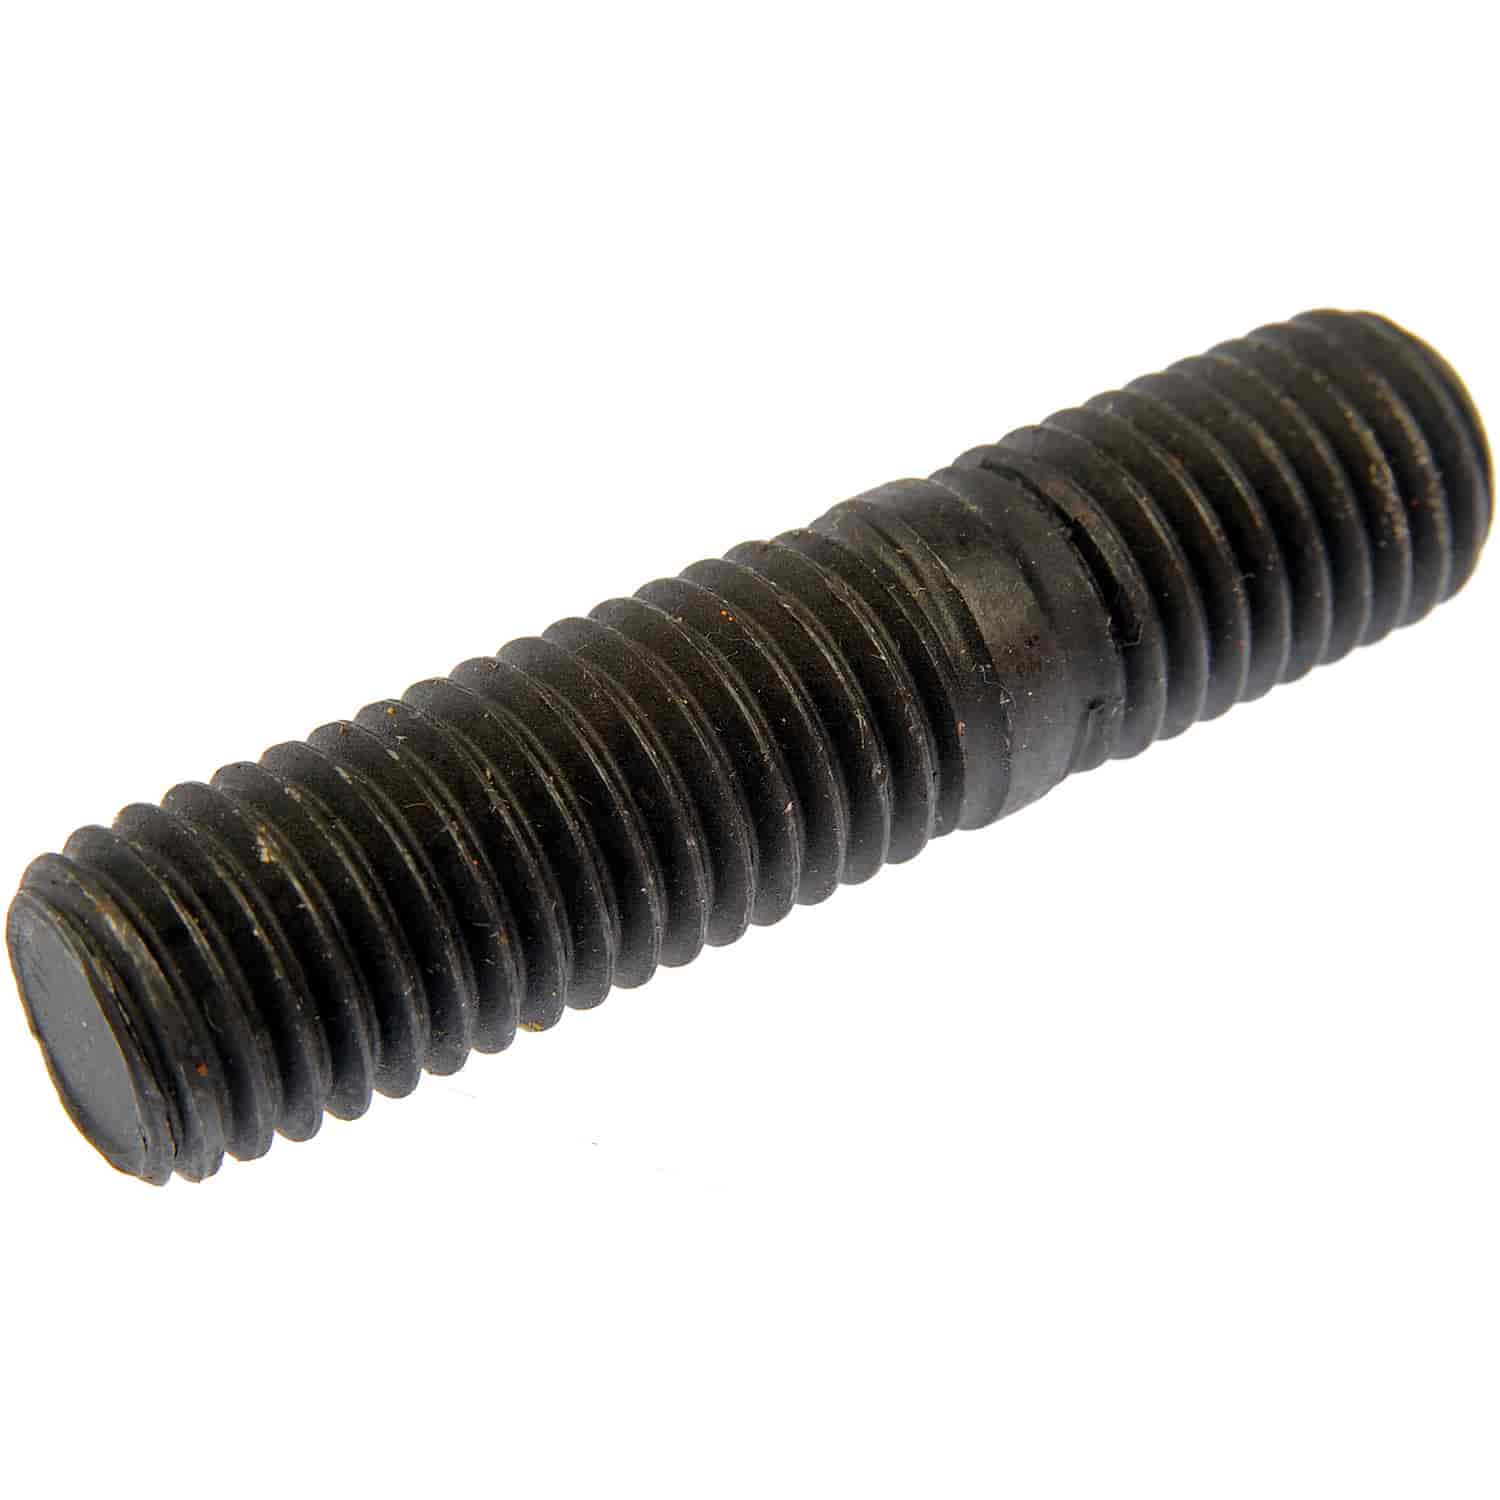 Double Ended Wheel Stud 5/8-11 Length 2-5/8 In.